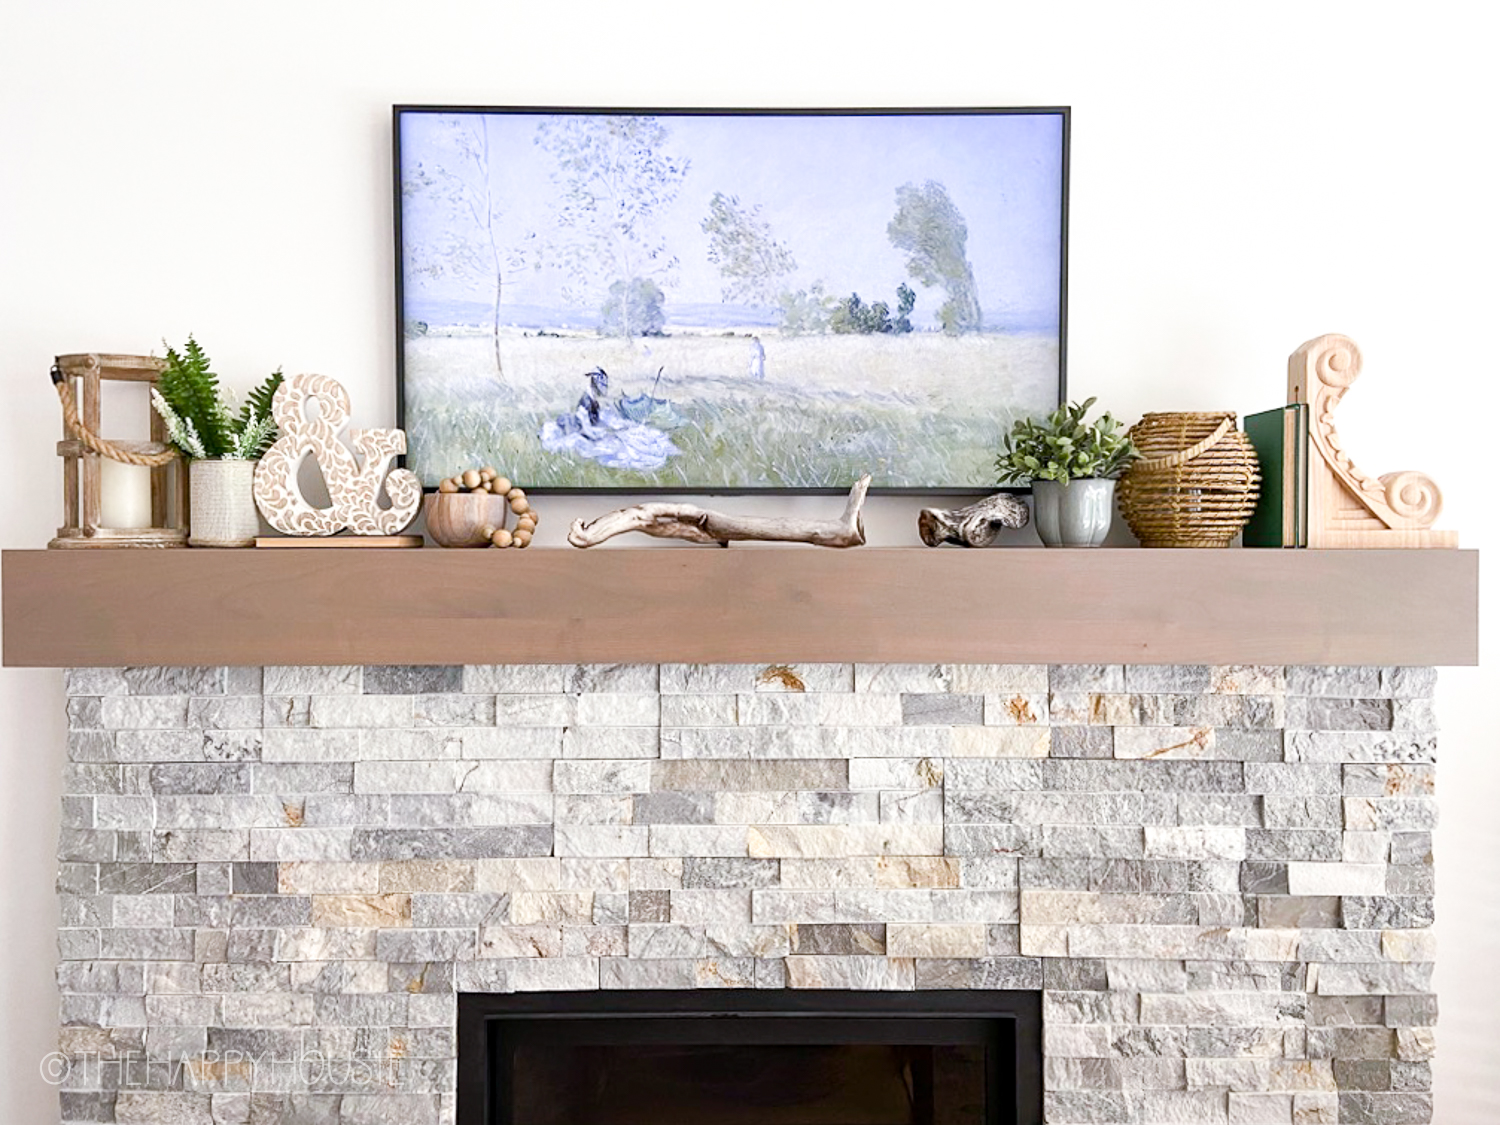 A frame TV on top of a fireplace mantel.